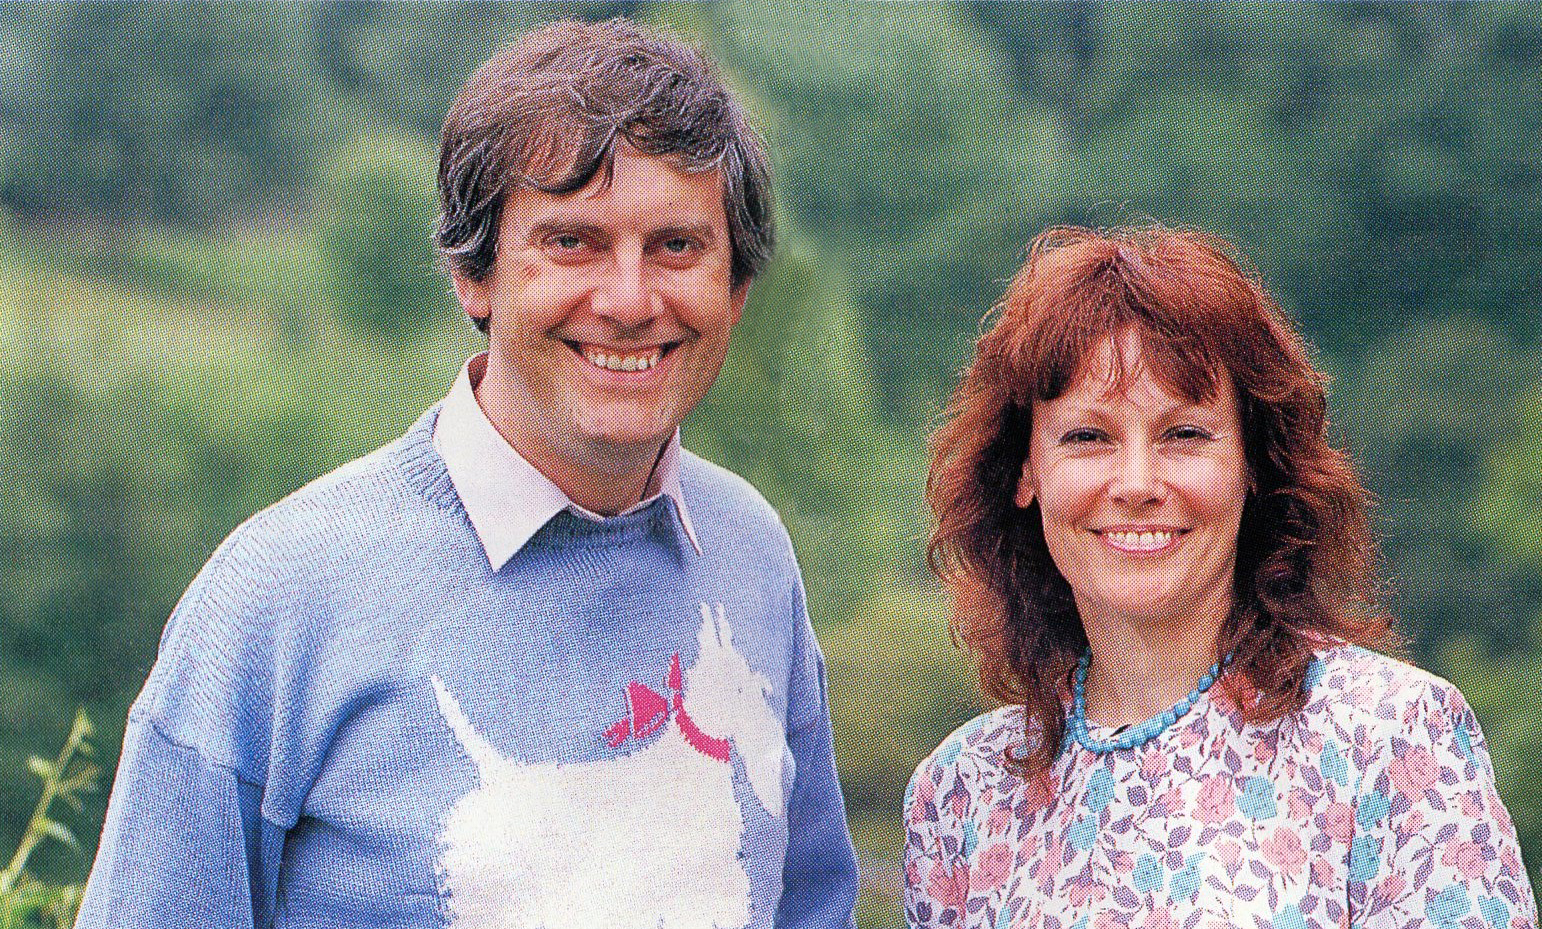 Gyles Brandreth and Michele Brown, Discovering Gardens, ITV, 1988-89